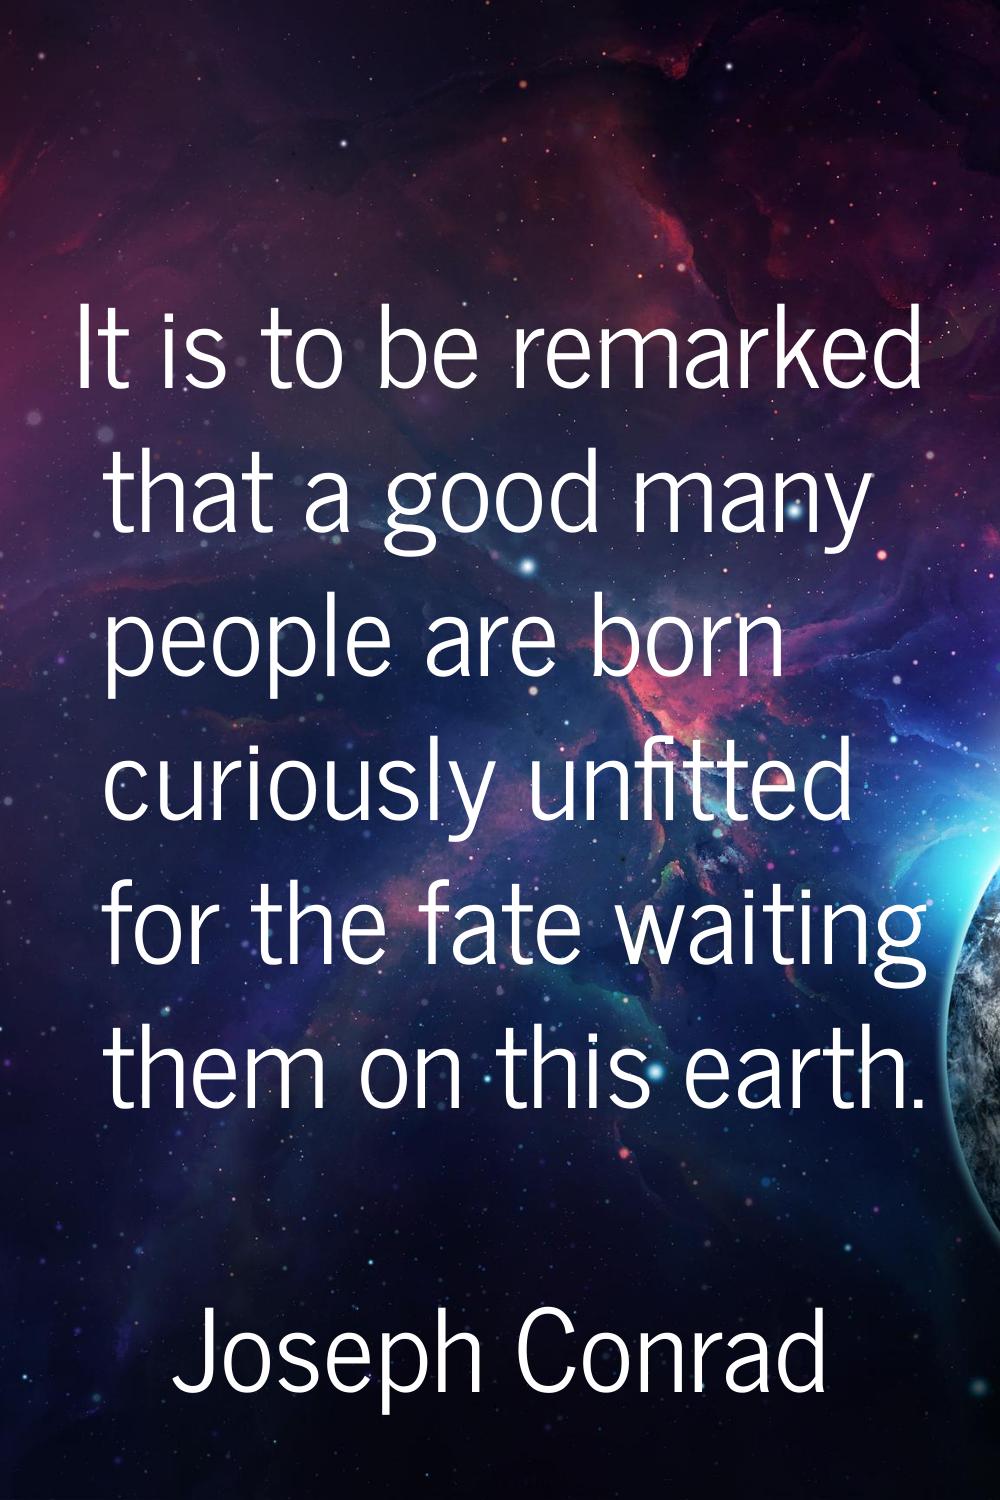 It is to be remarked that a good many people are born curiously unfitted for the fate waiting them 